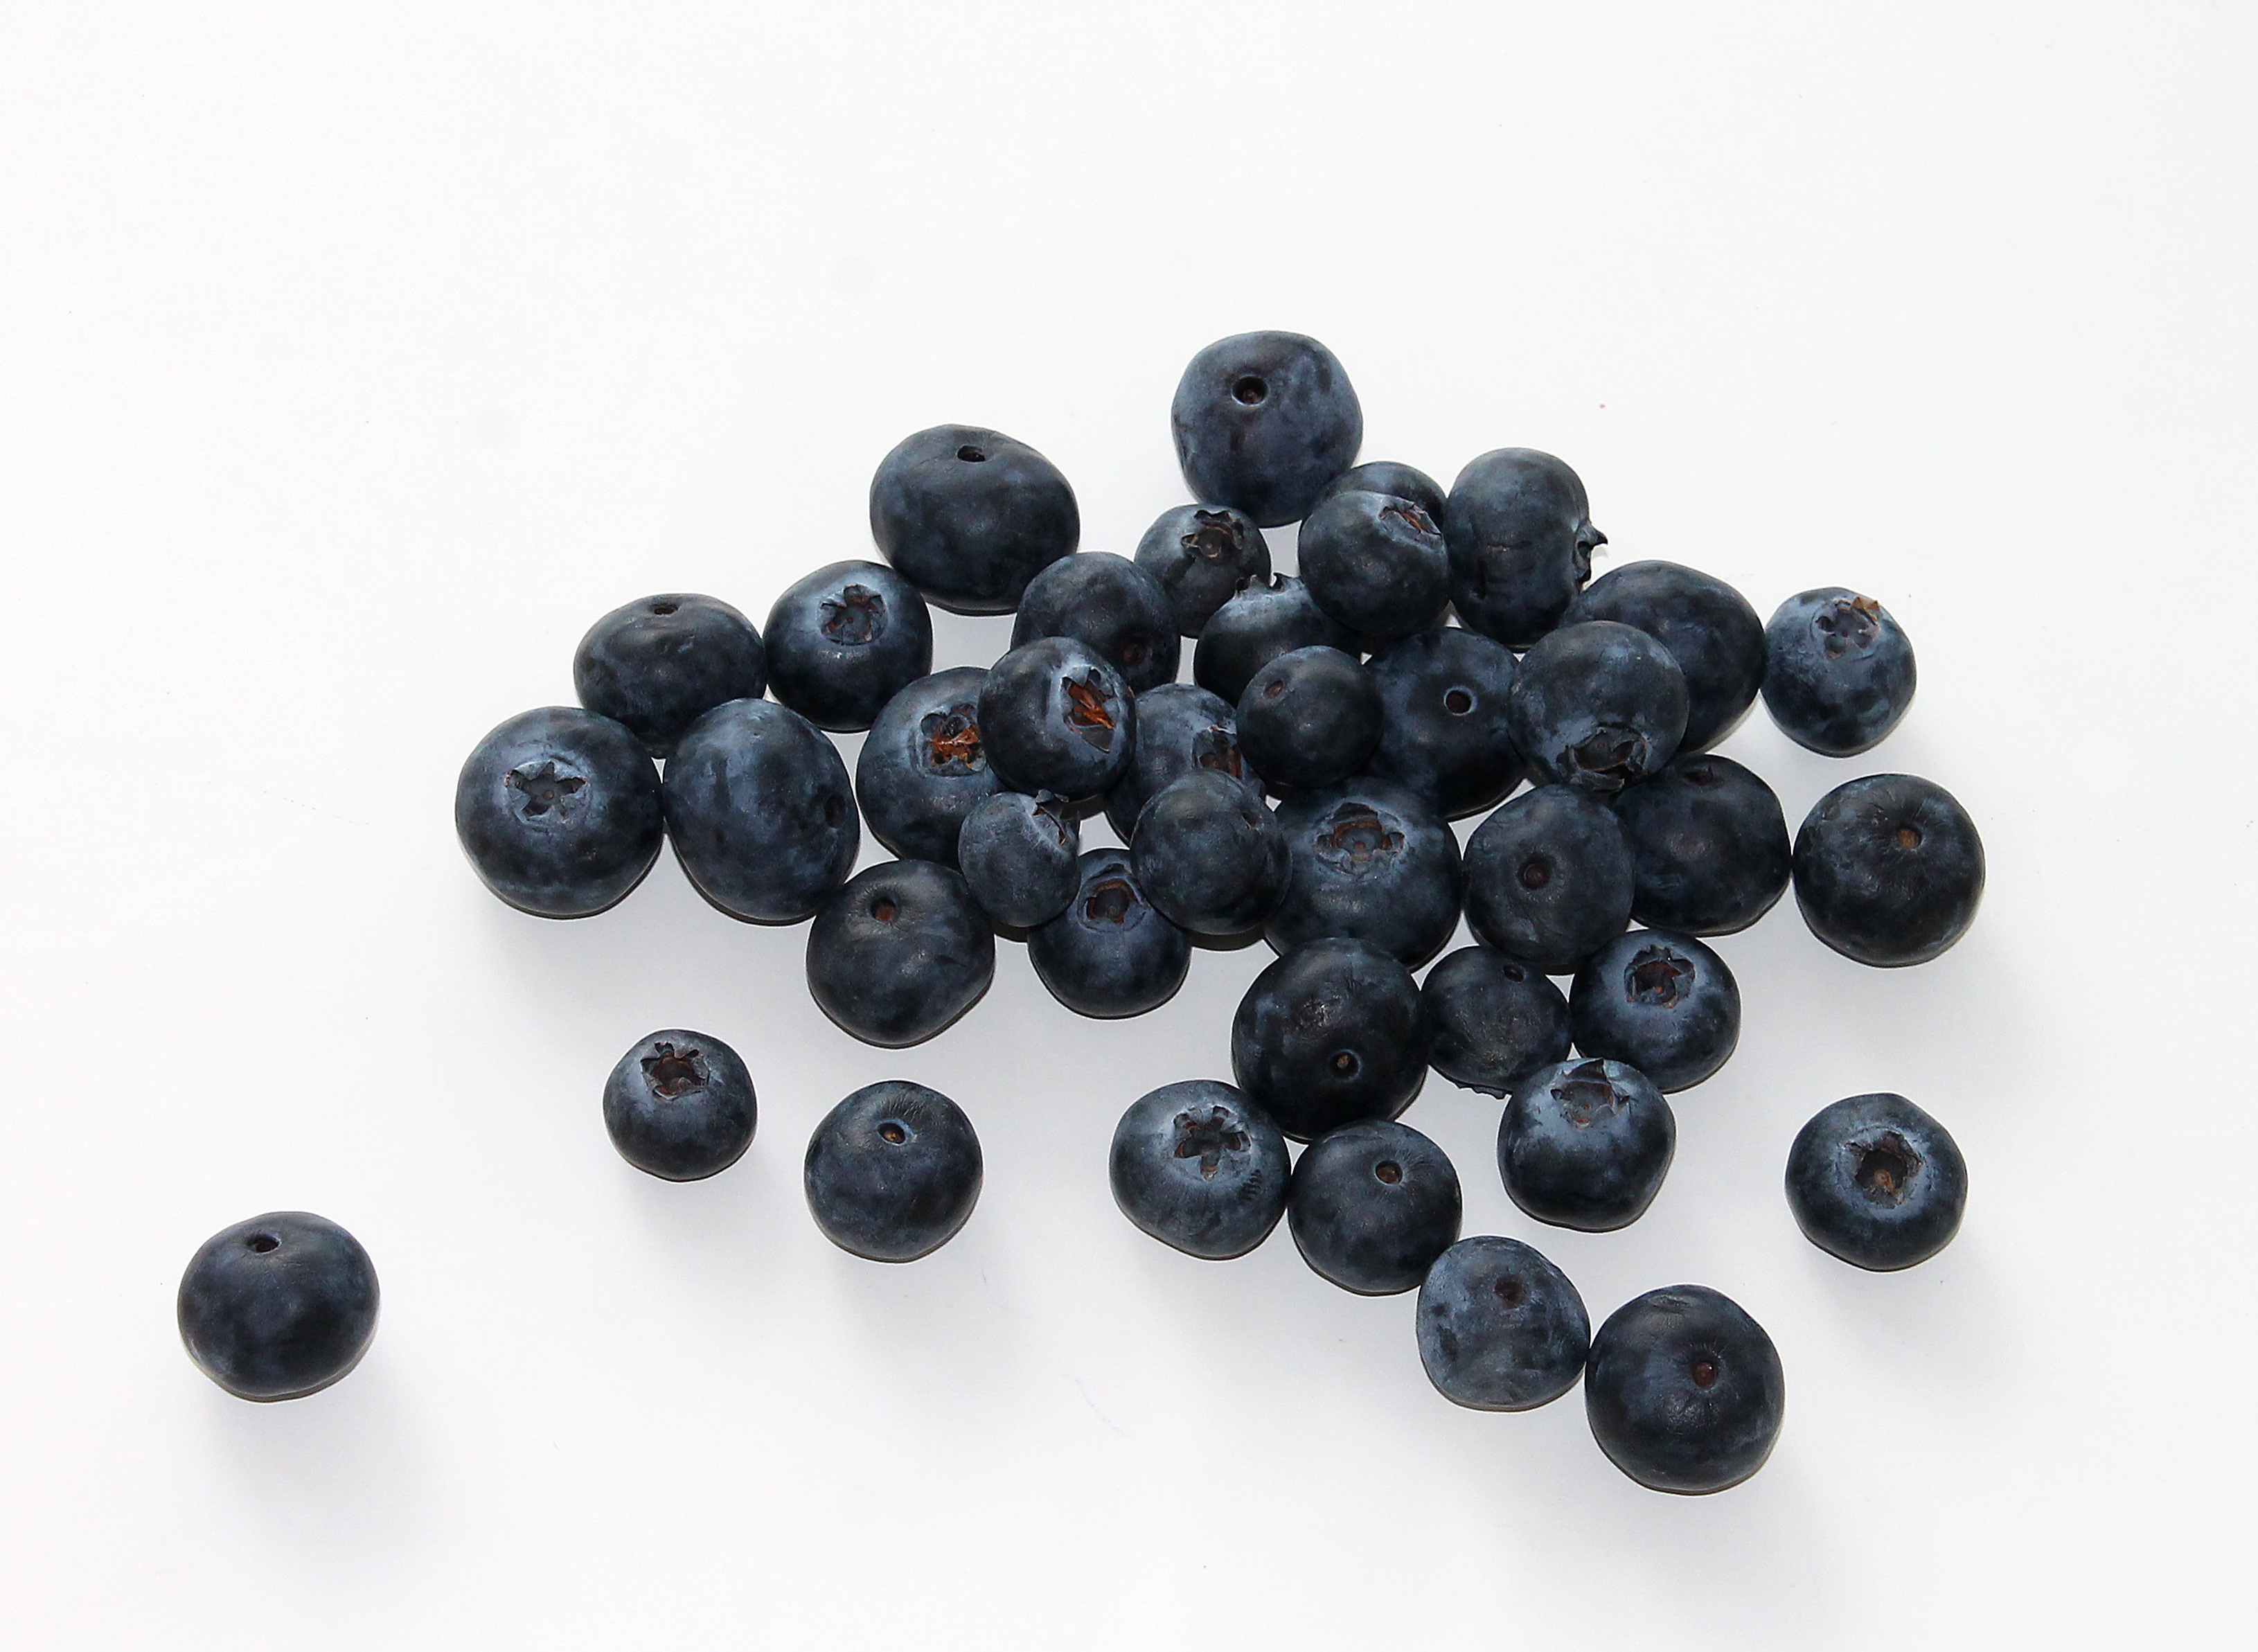 Blueberry wallpaper on a white background